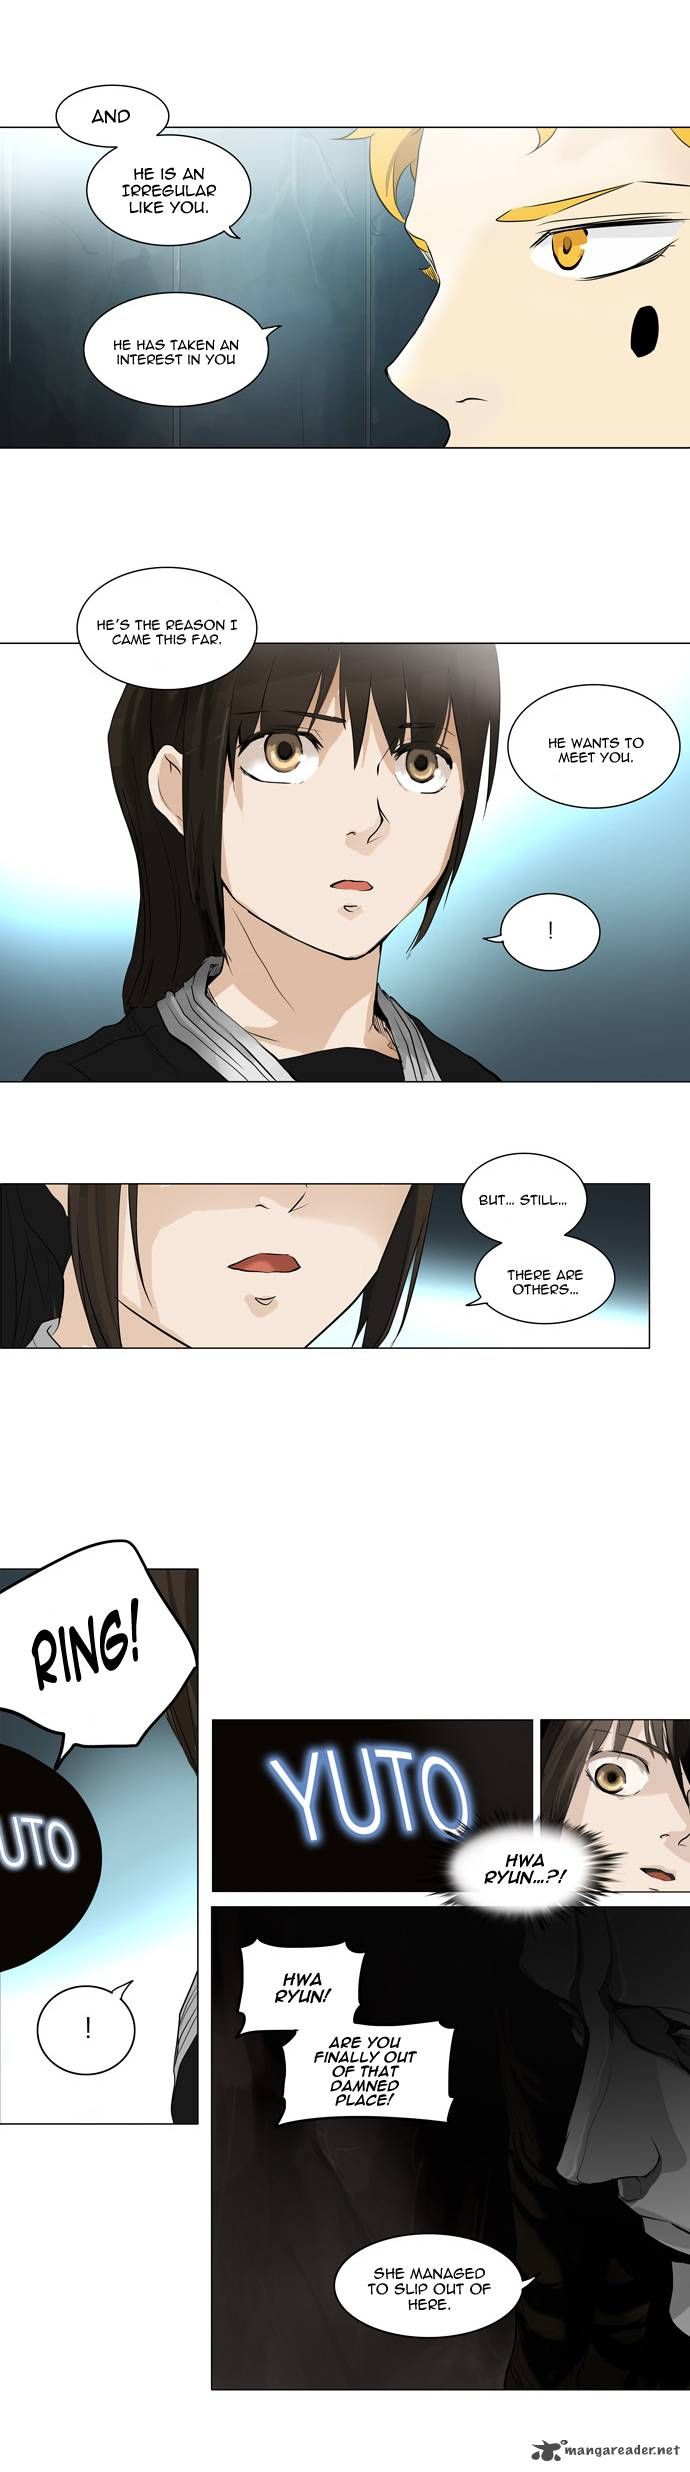 Tower of God 178